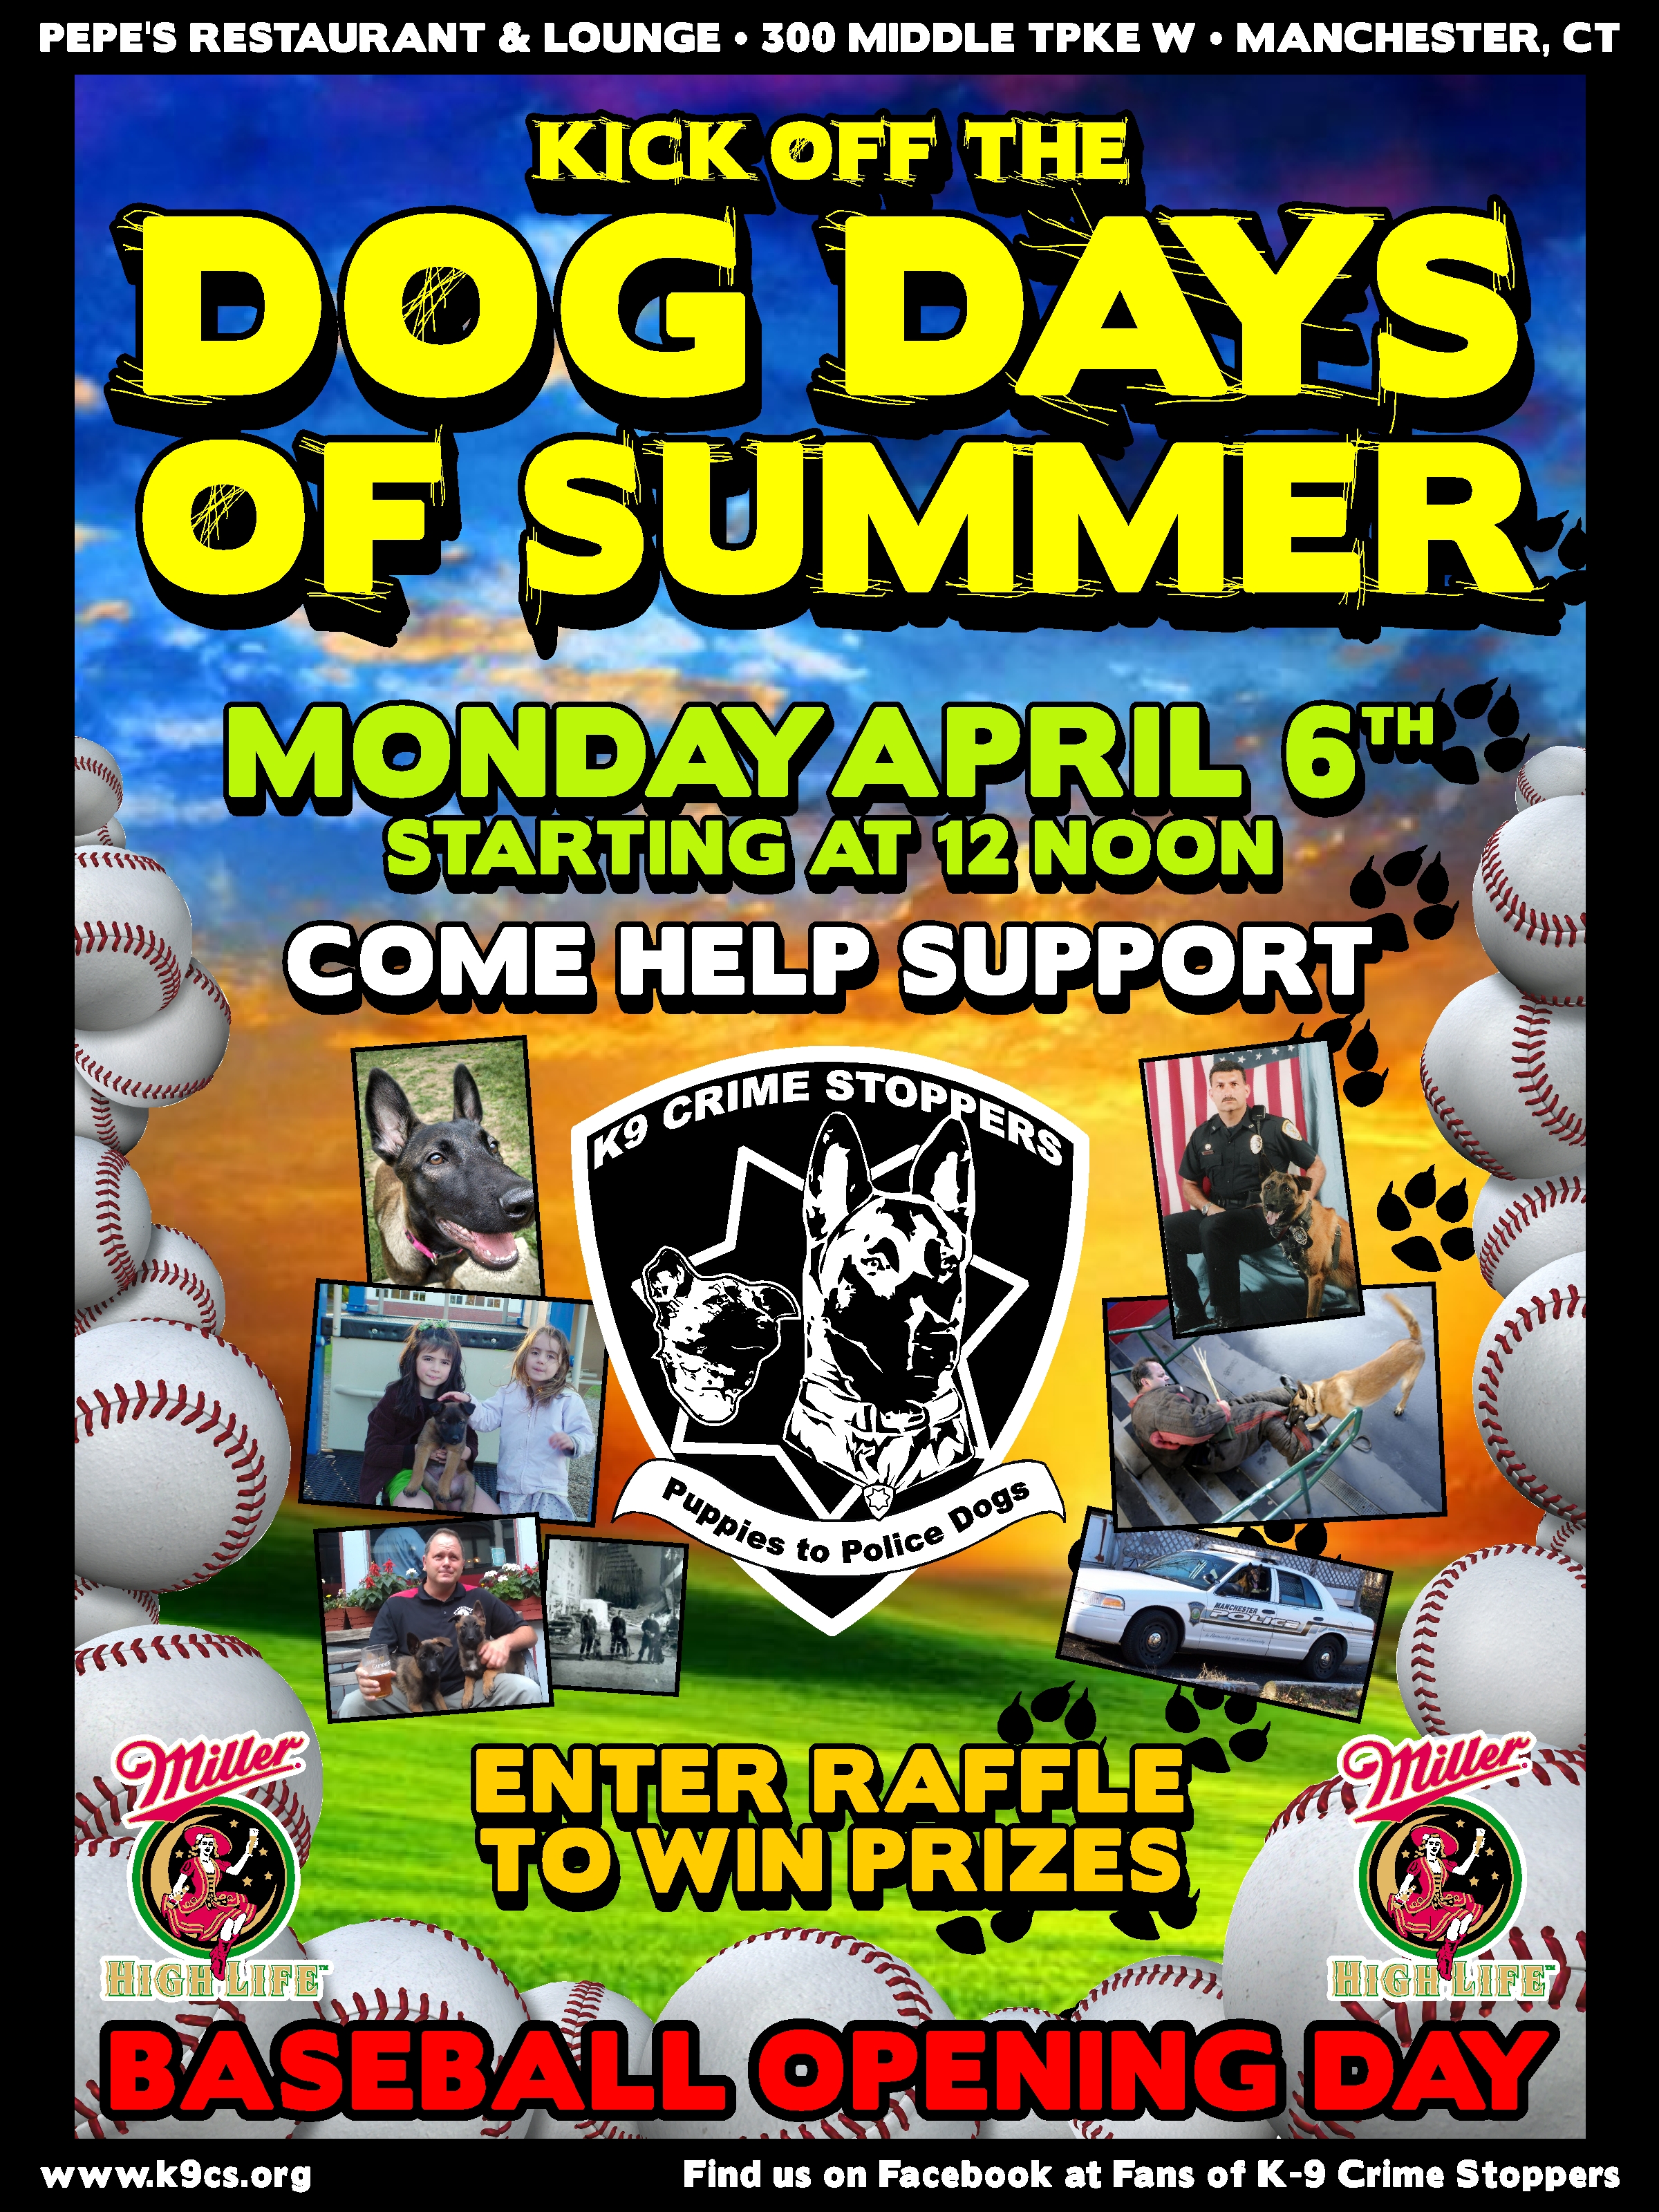 Kick Off the Dog Days of Summer on Baseball’s Opening Day!